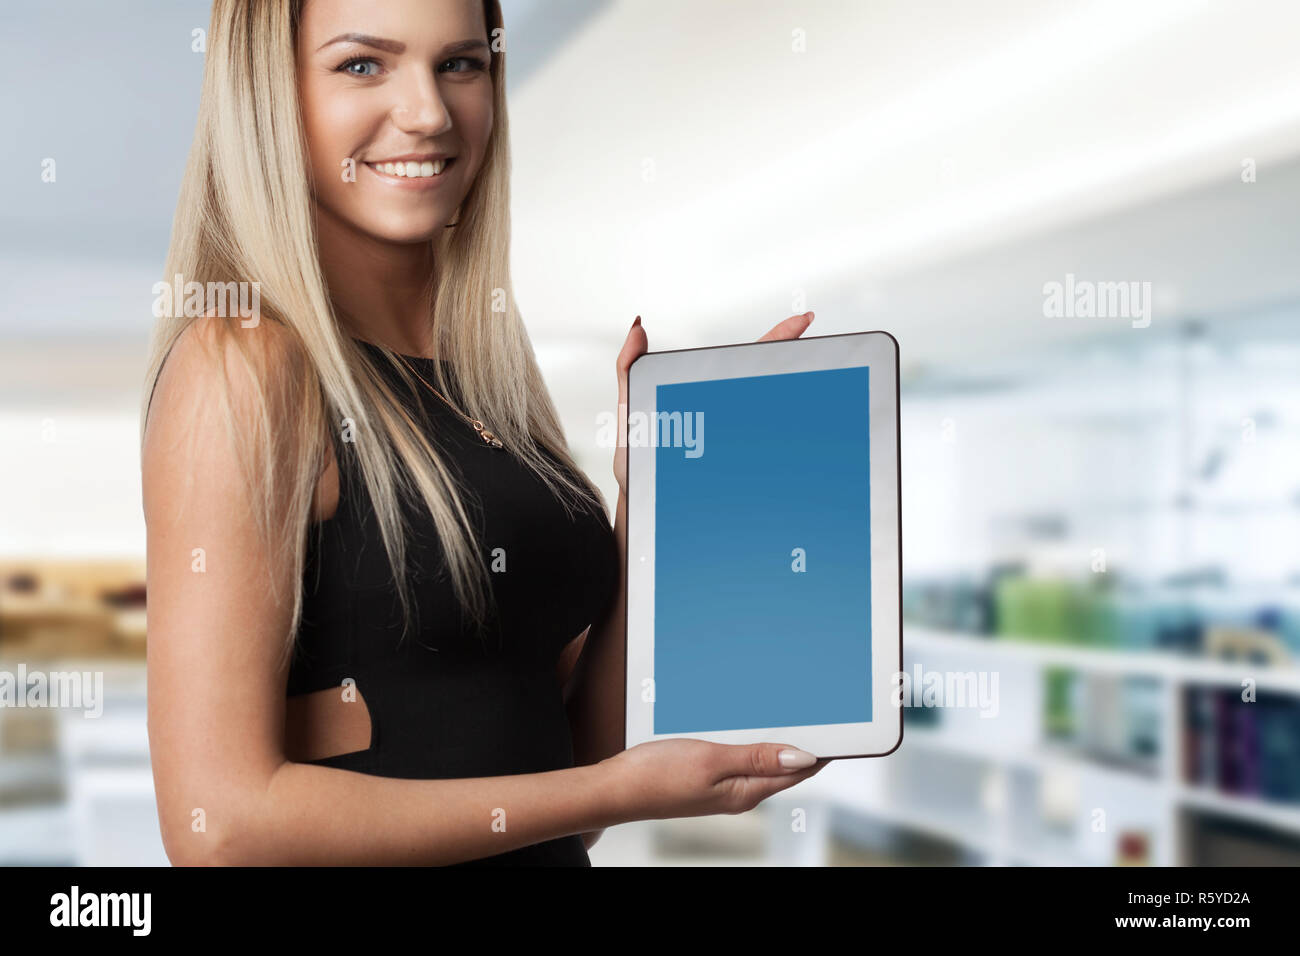 Business, technology, internet and networking concept. Young successful entrepreneur in the work process Stock Photo